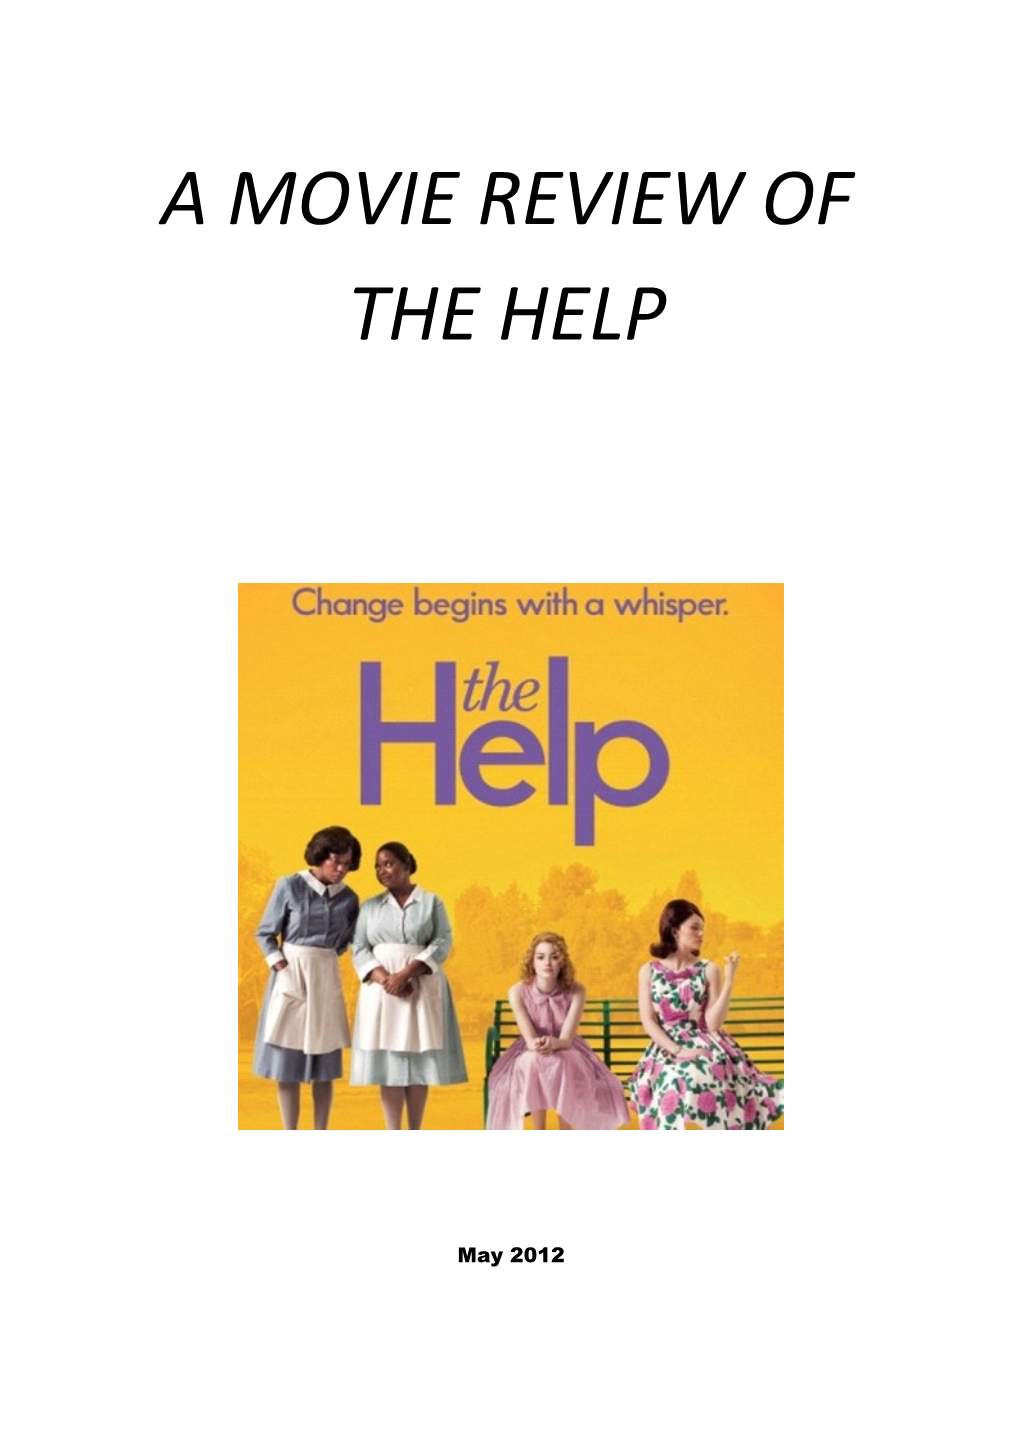 Review of the Help